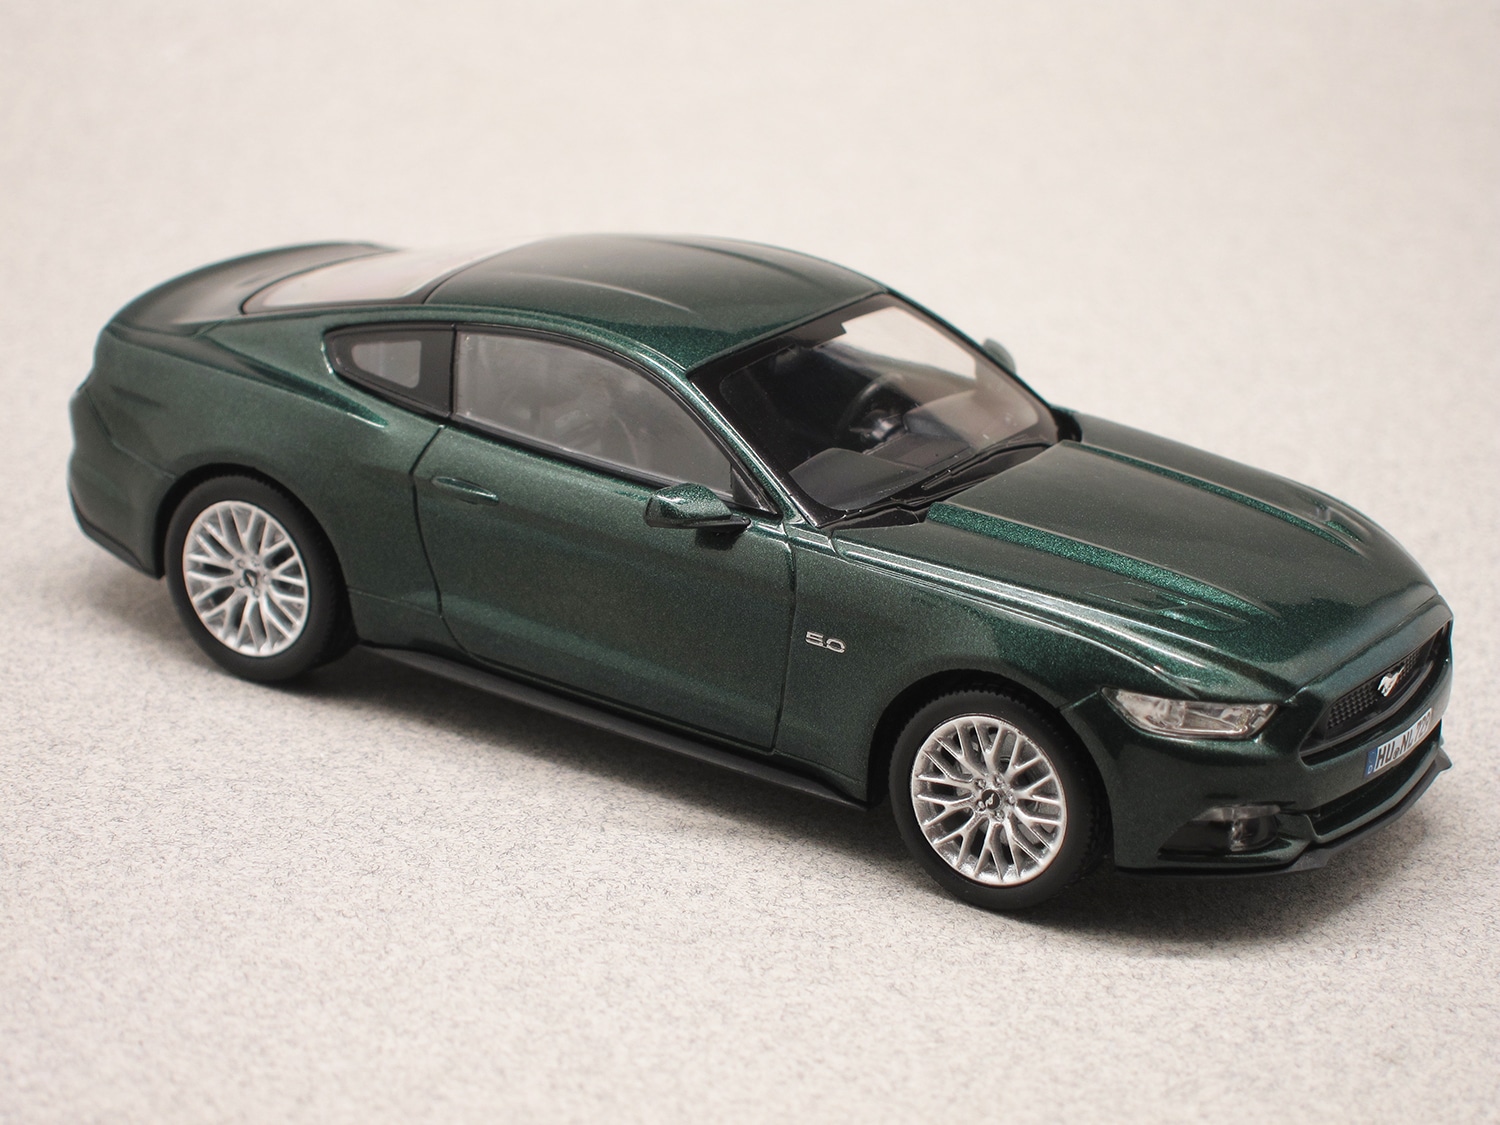 Ford Mustang 2016 (Norev) 1:43